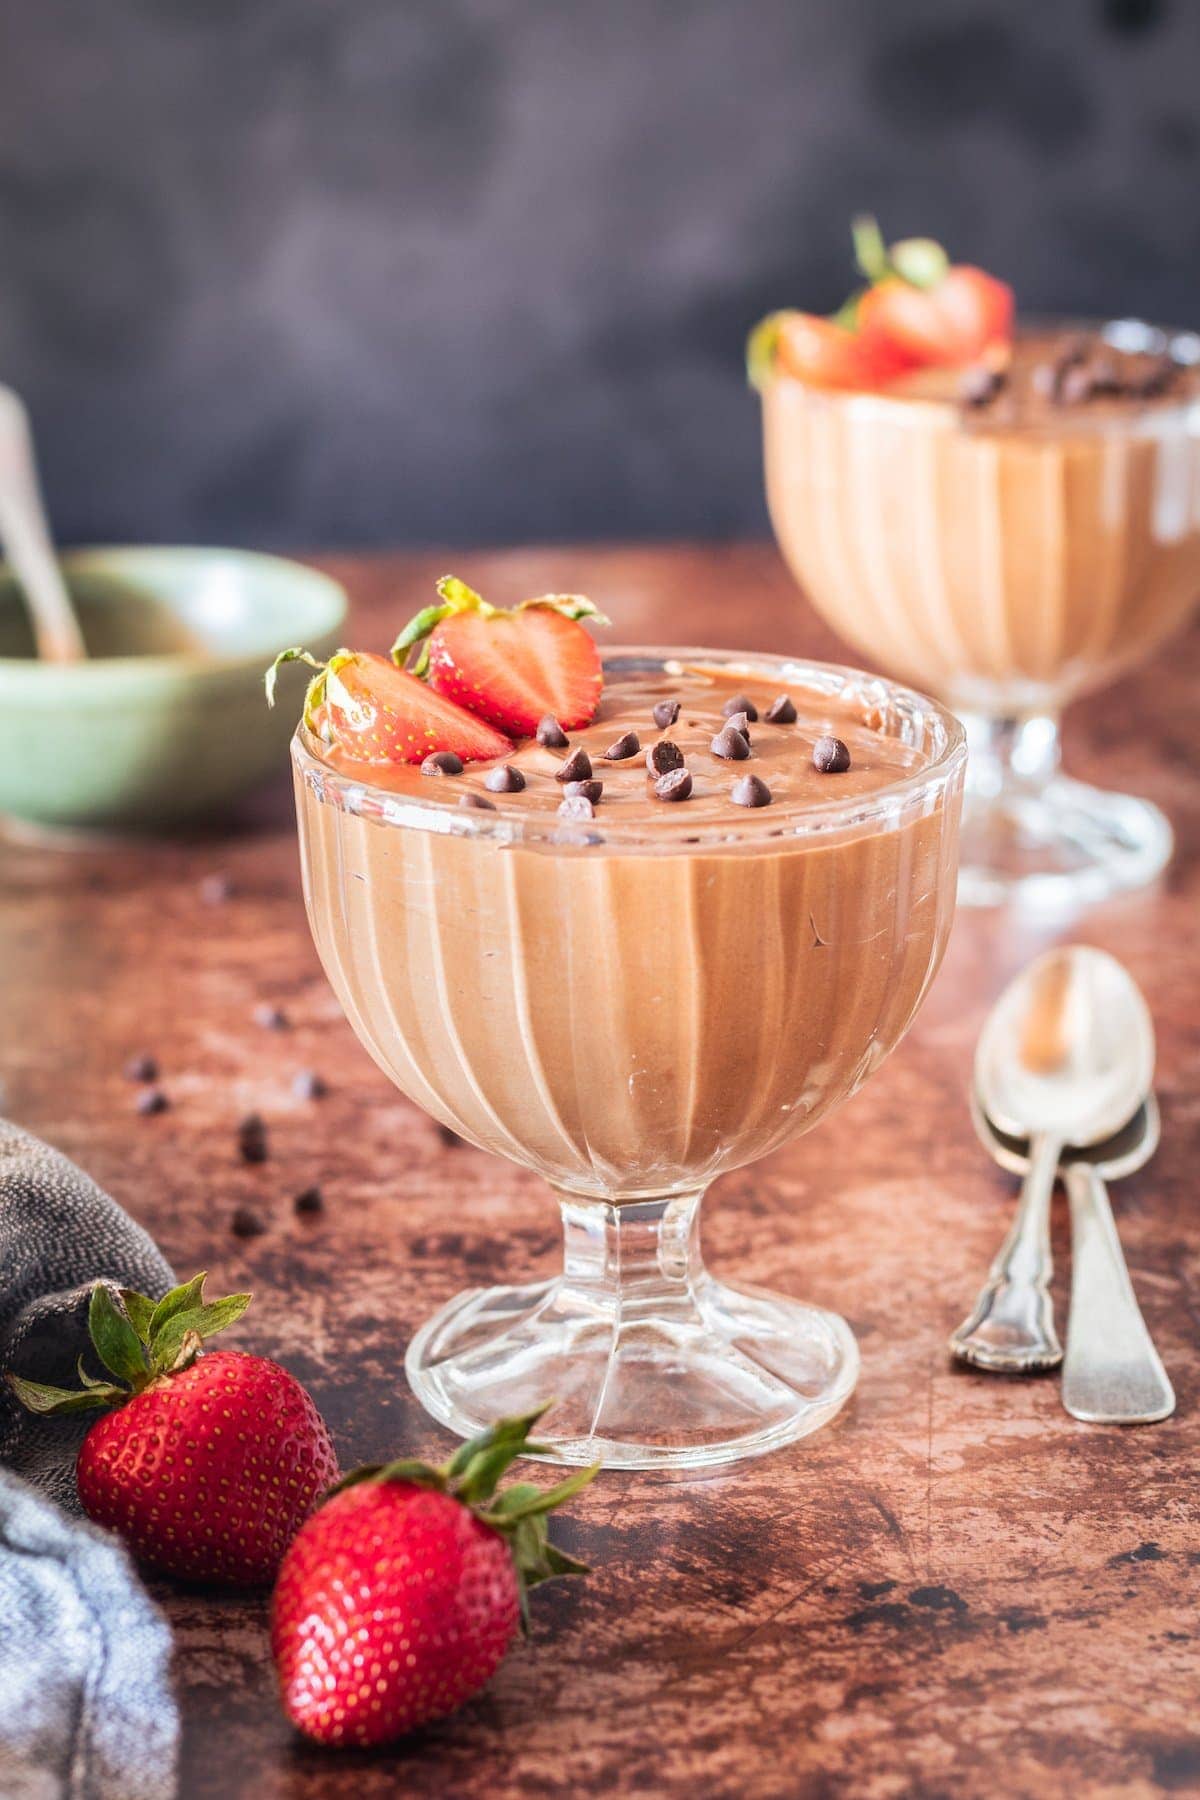 https://cookiesandcups.com/wp-content/uploads/2018/05/Easy-Chocolate-Mousse-17.jpg